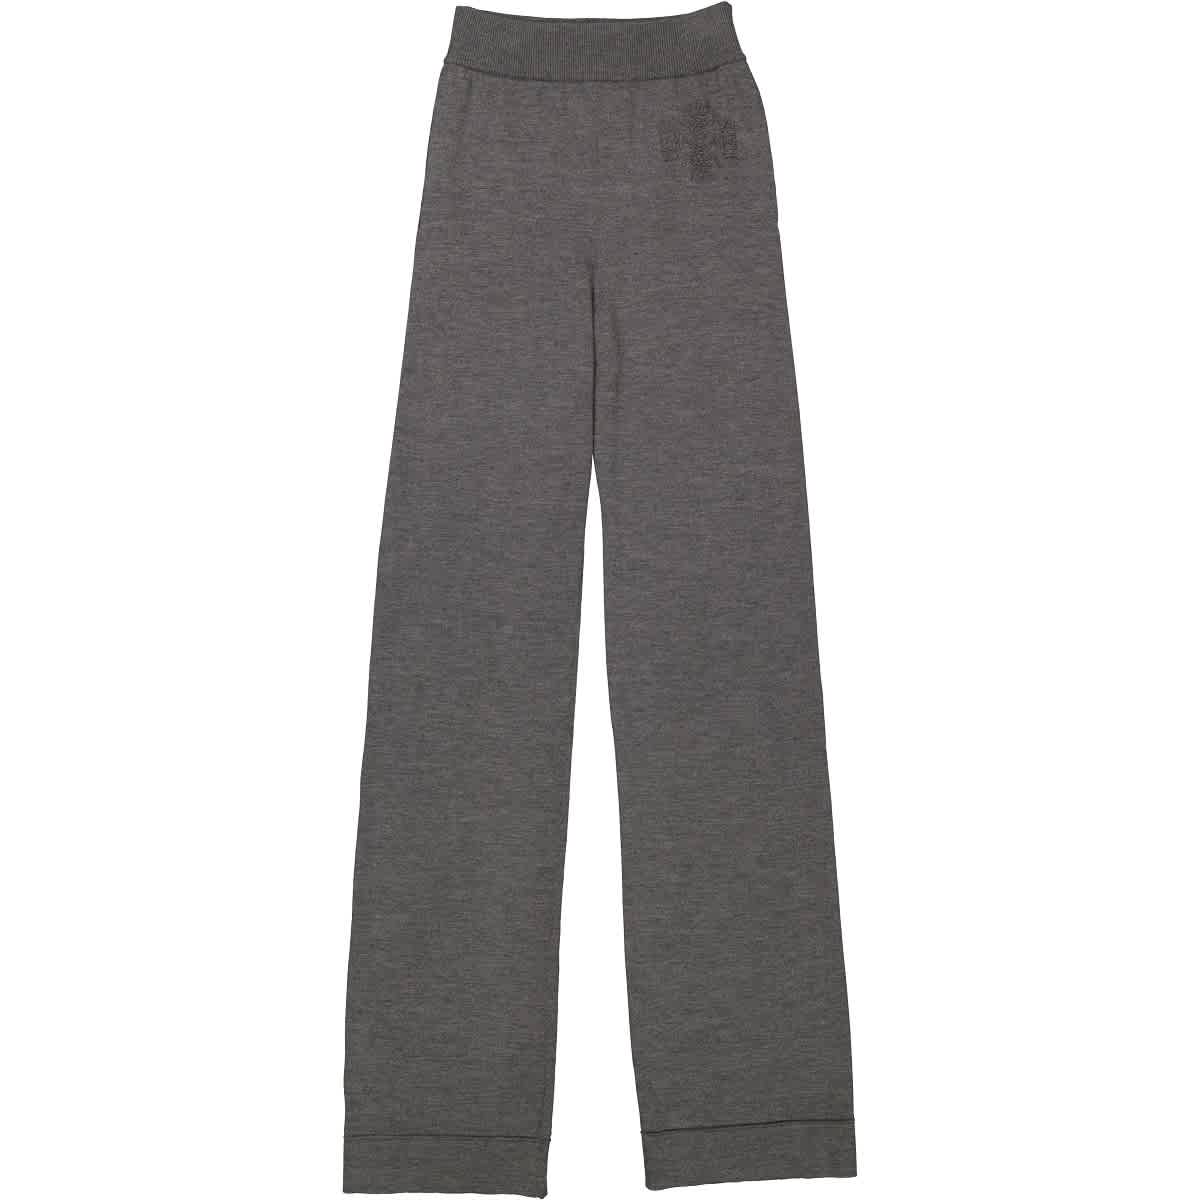 Barrie Ladies Grey Fine Knit Flared Trousers